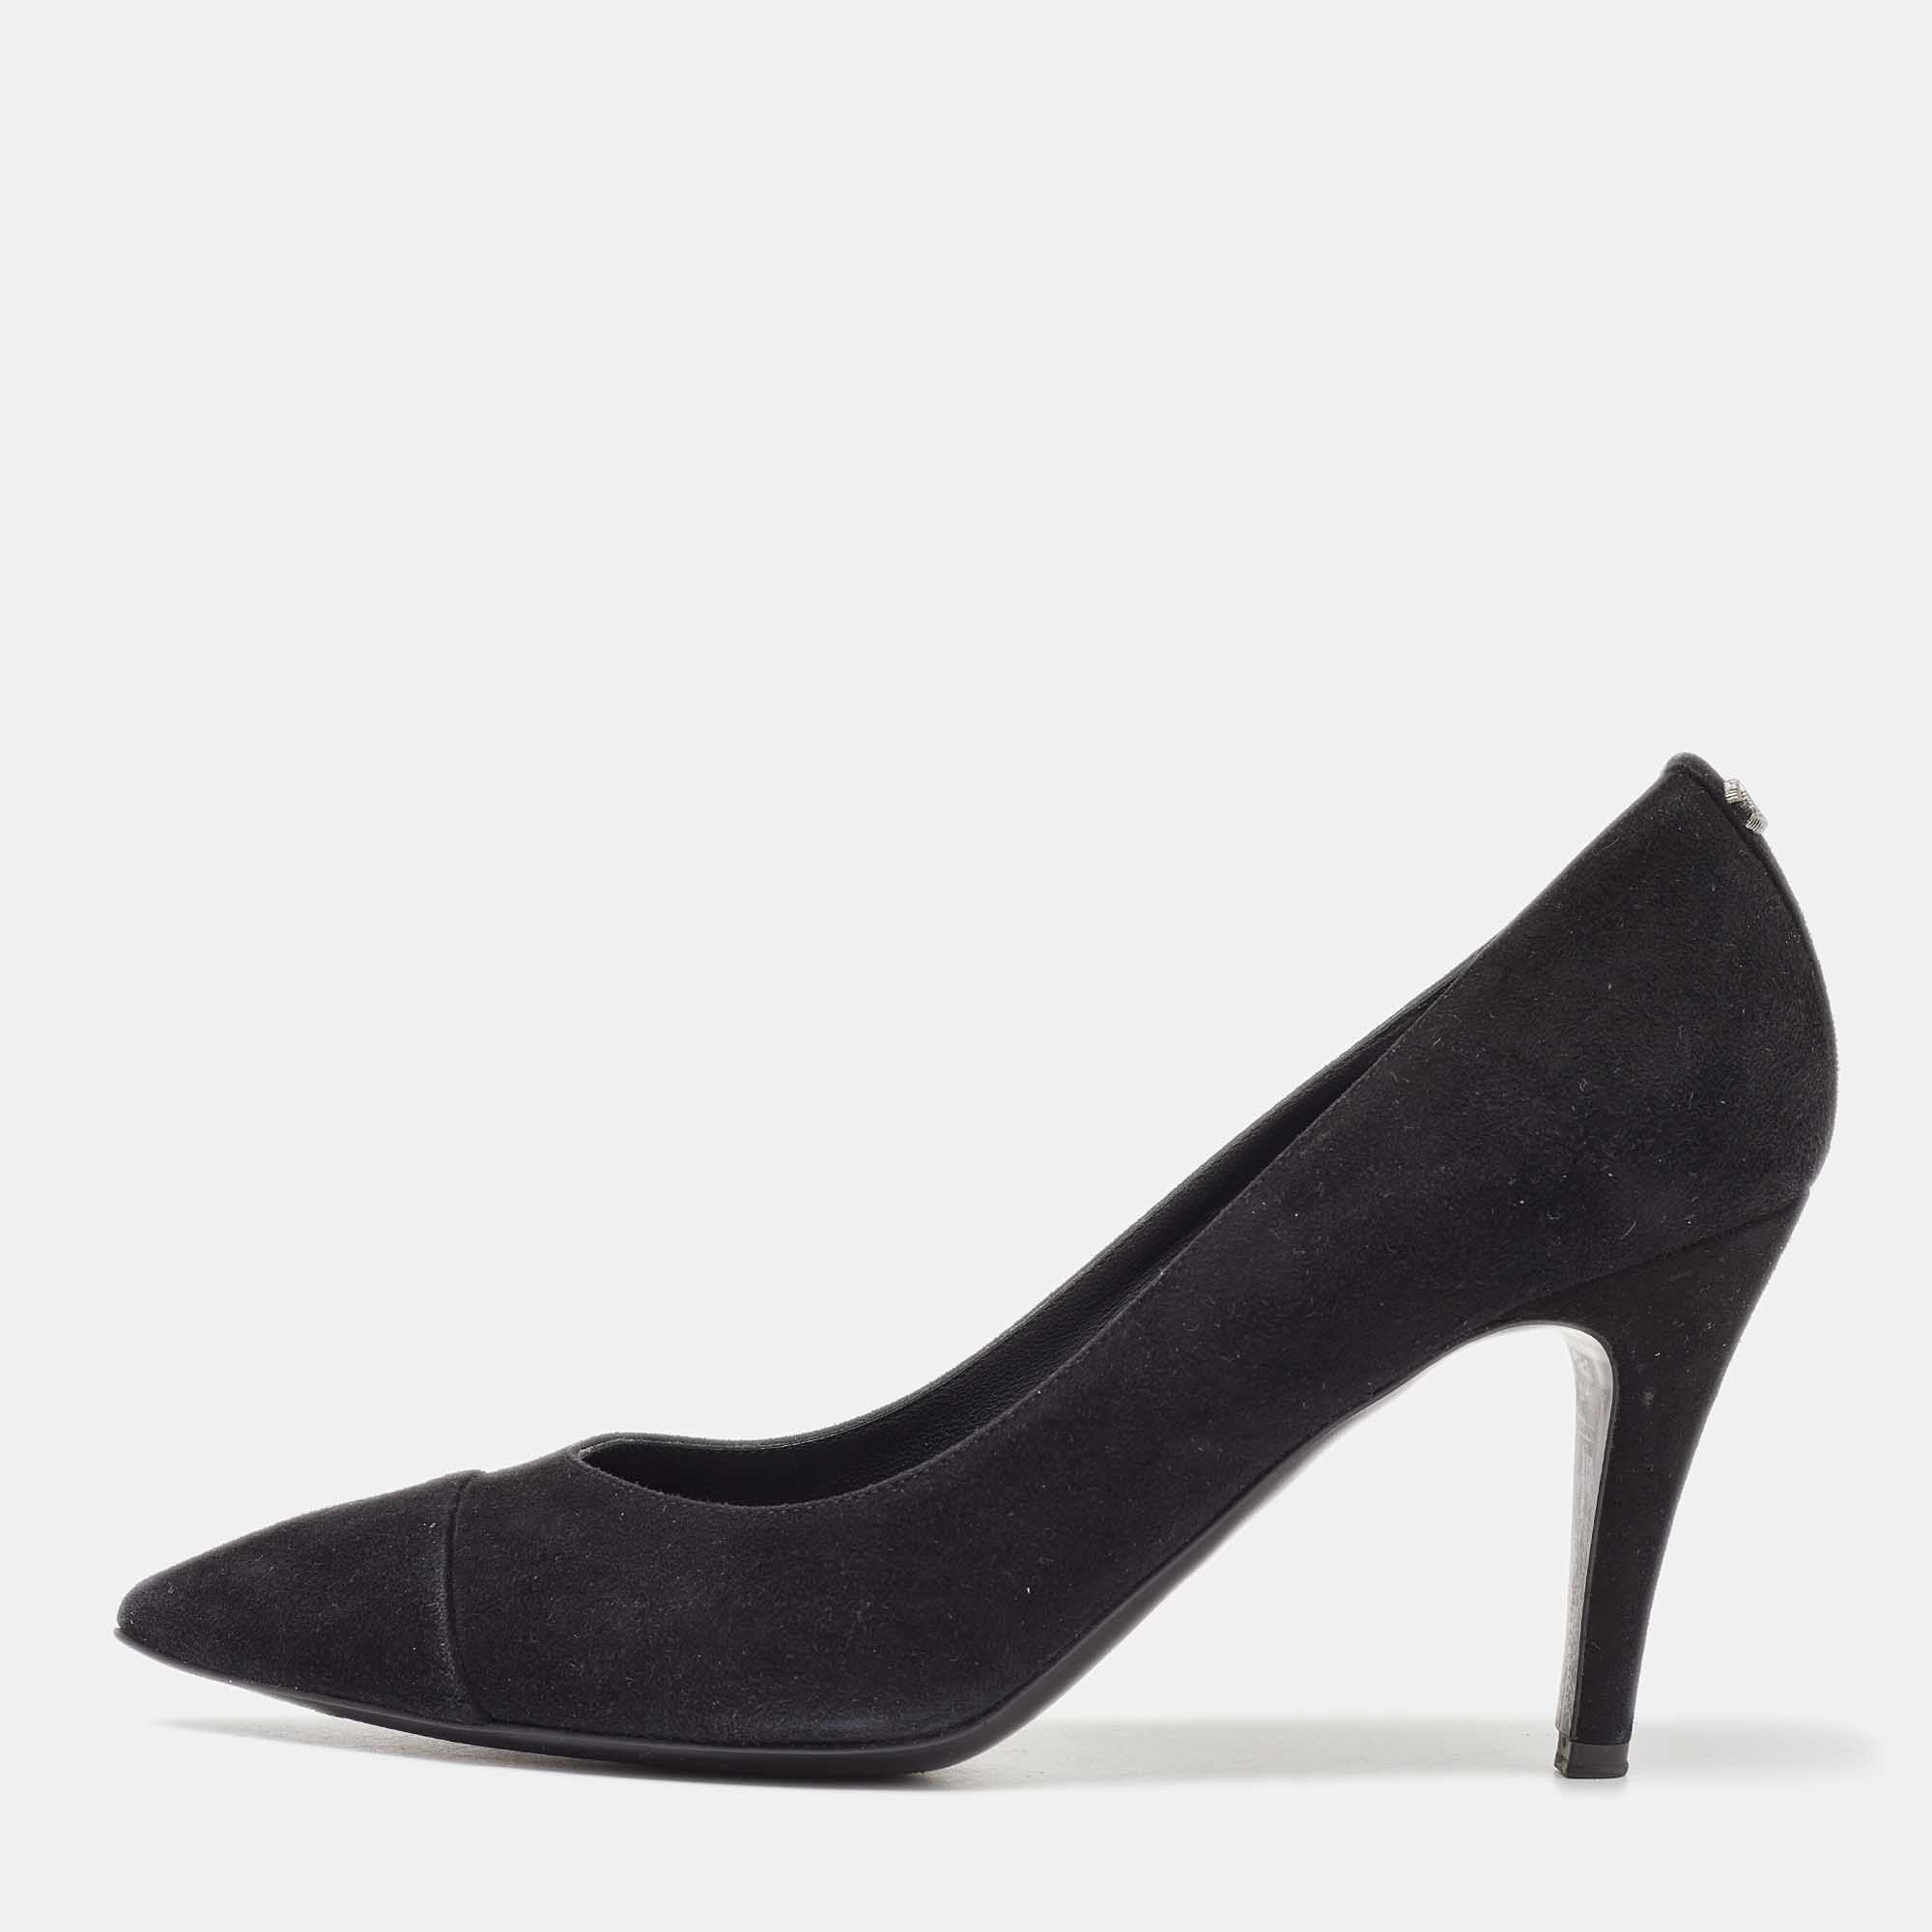 Chanel Black Suede Cap Toe Pointed Pumps Size 37.5